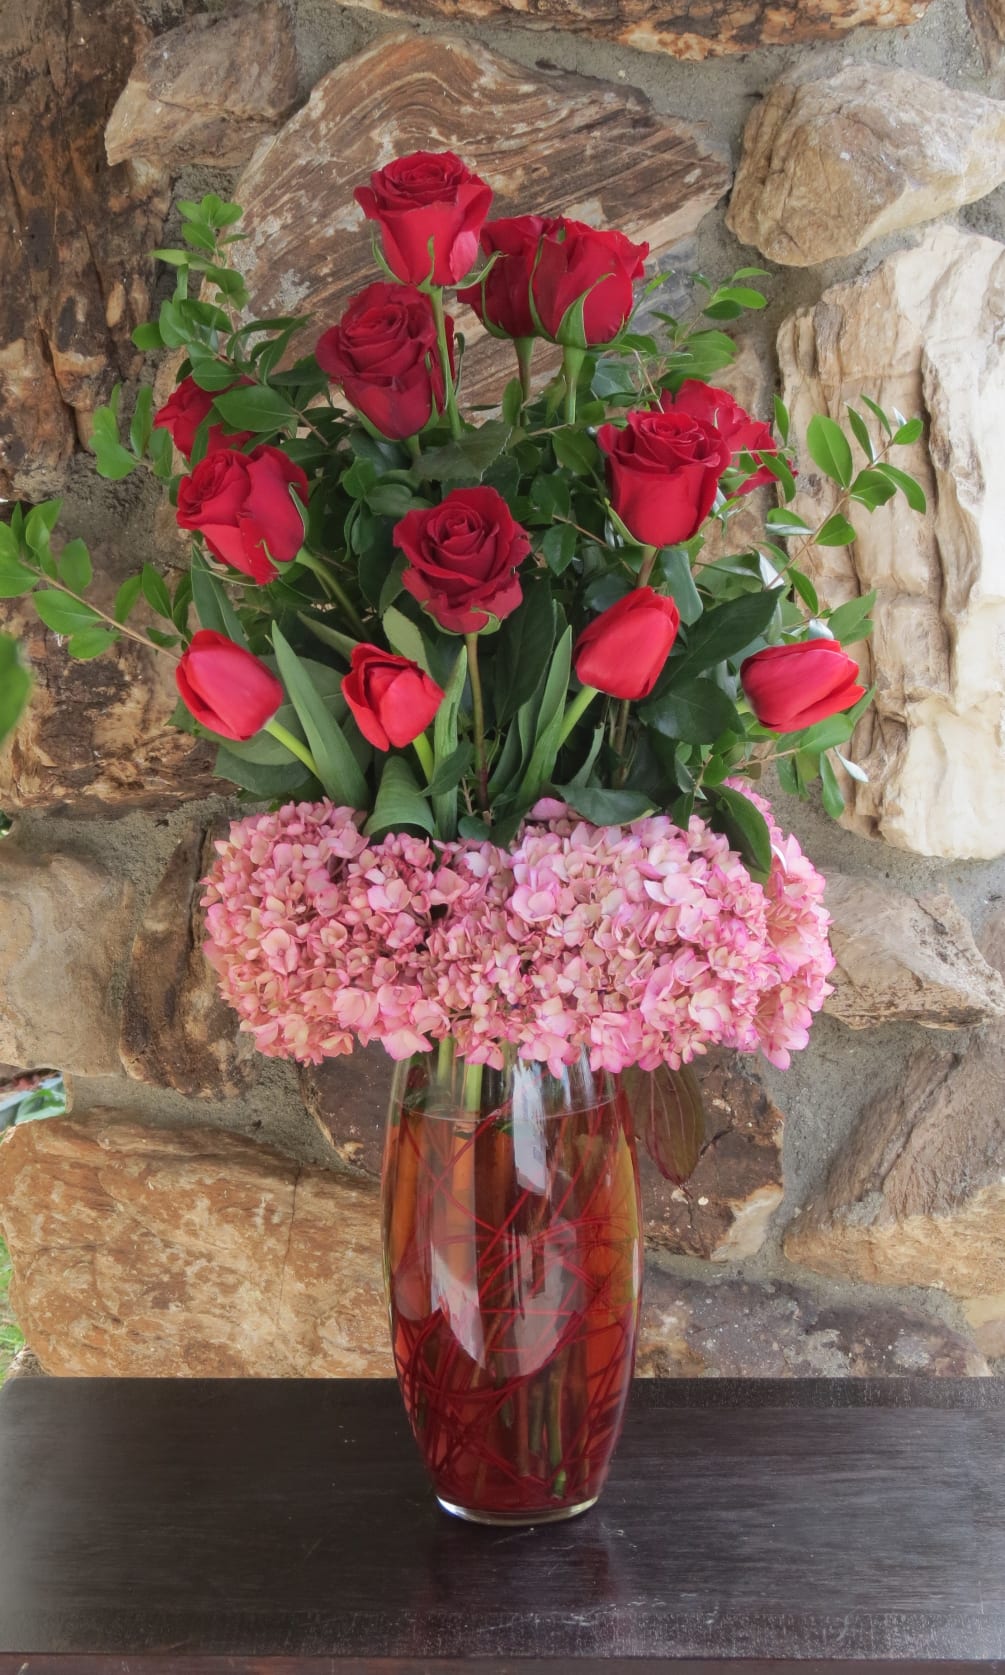 12 Red roses arranged on a glass vase with tulips and Hydrangeas